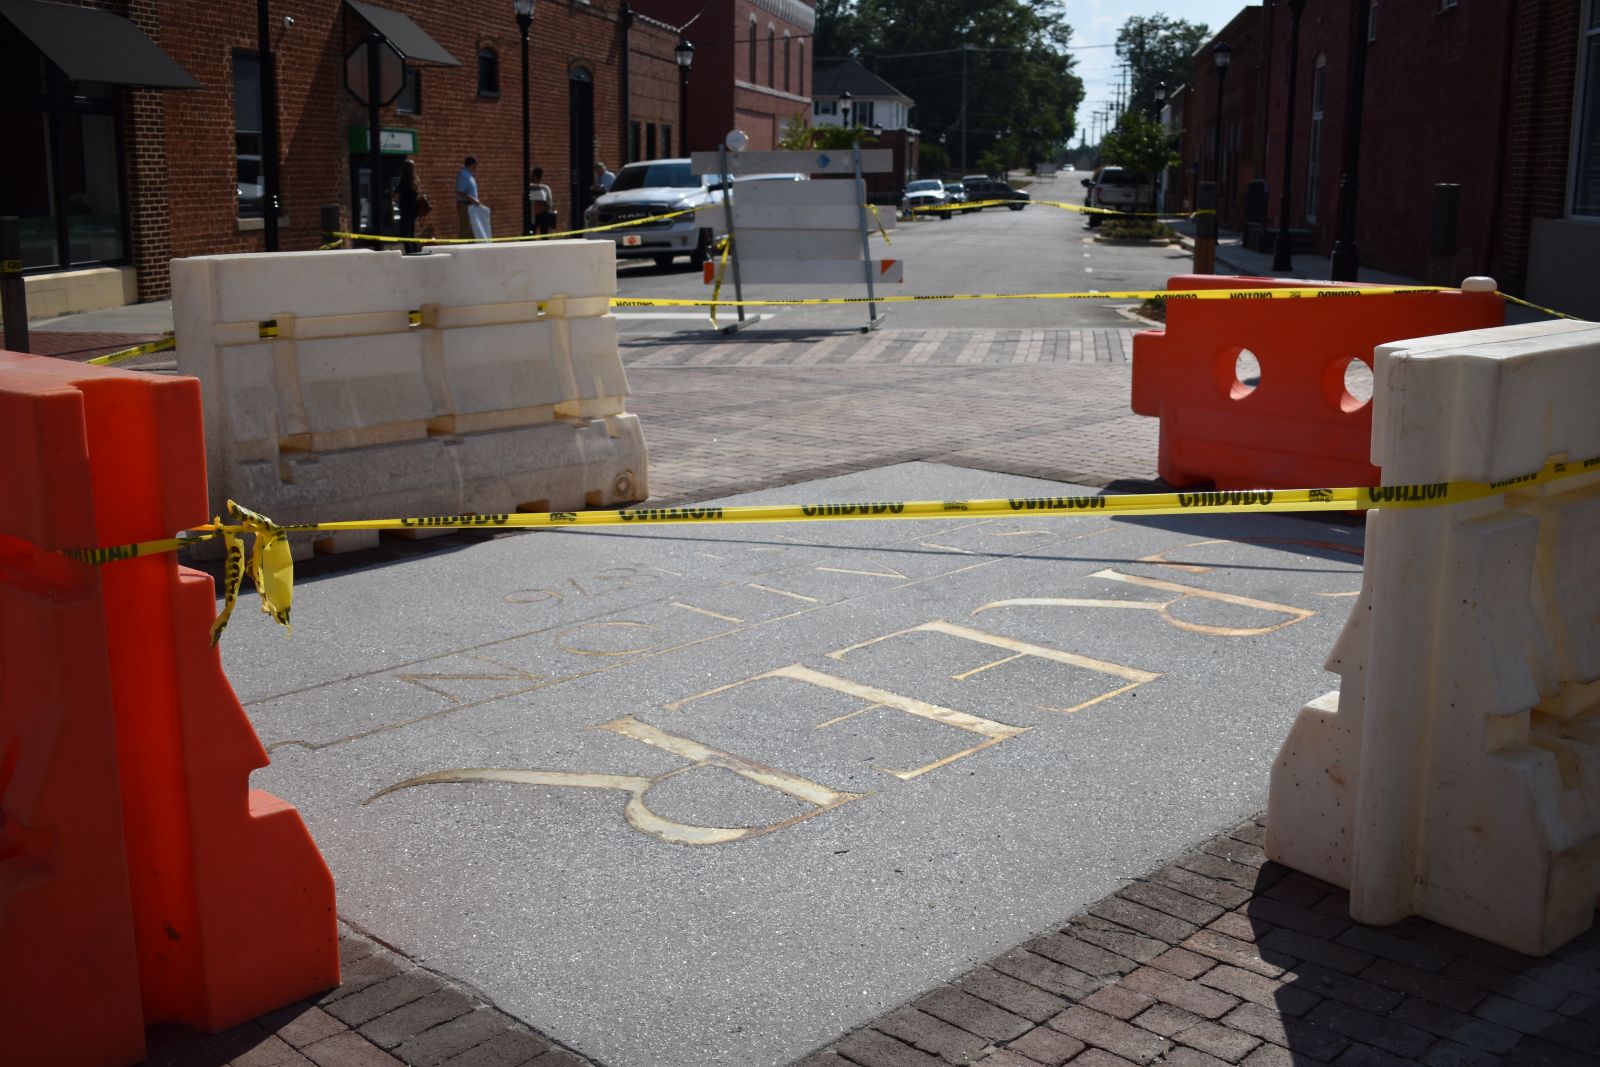 By July 2, the centerpiece inlay at the intersection of Trade and Randall Street had been installed and was blocked off from traffic. (Photo/Molly Hulsey)